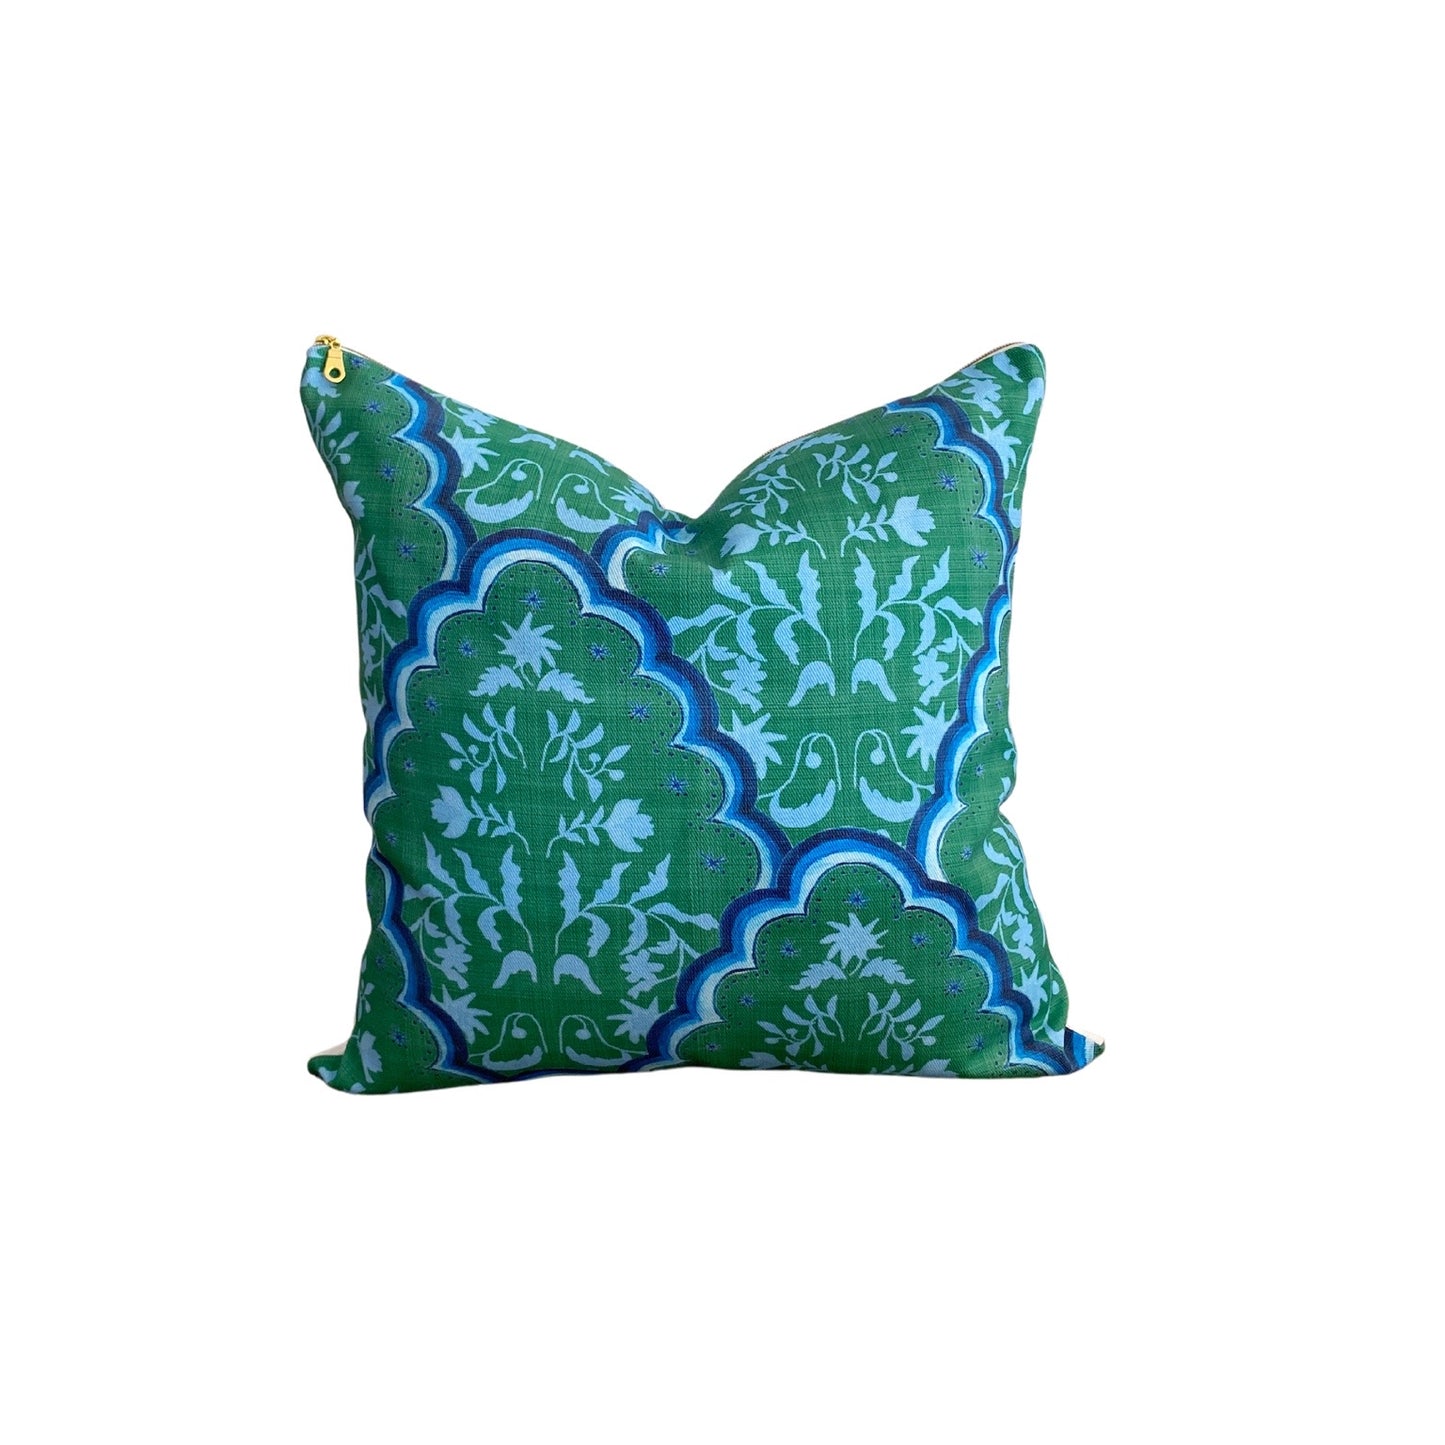 Blue and Green Scallop Paisley Pillow Cover- Designed by Danika Herrick